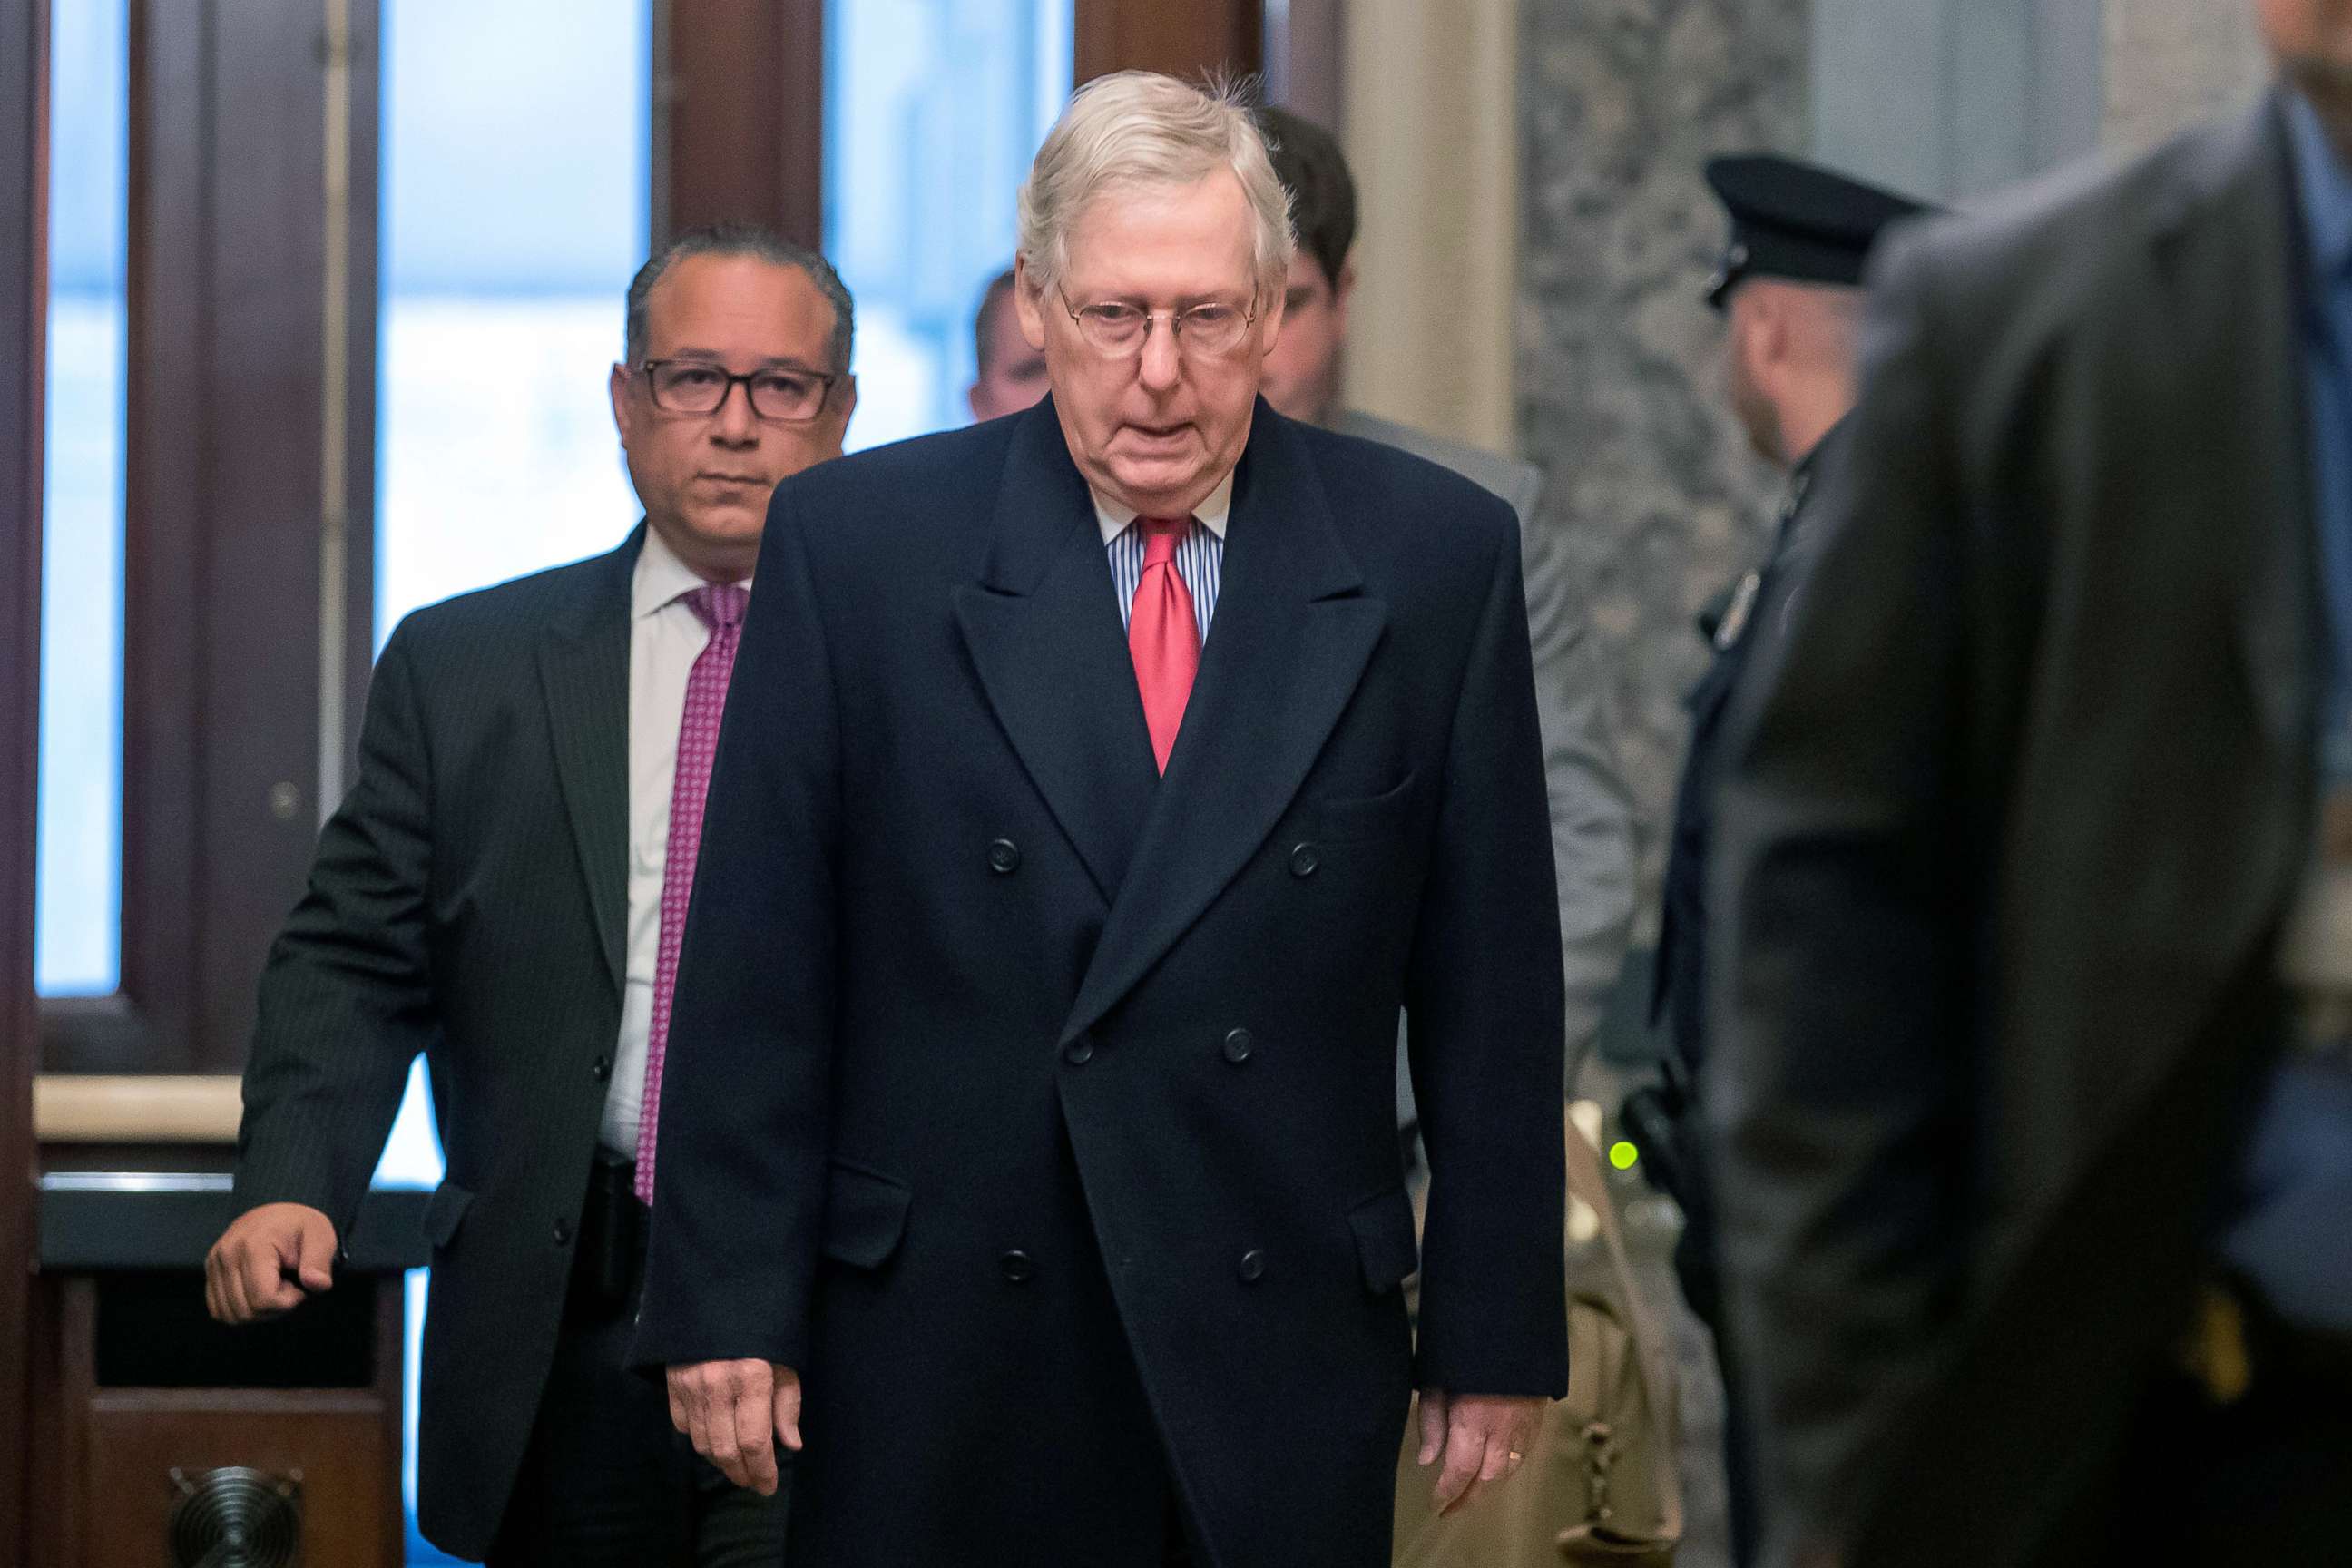 PHOTO: Senate Majority Leader Mitch McConnell arrives for work during the second week of the impeachment trial of President Donald Trump at the U.S. Capitol in Washington, Jan. 28, 2020.